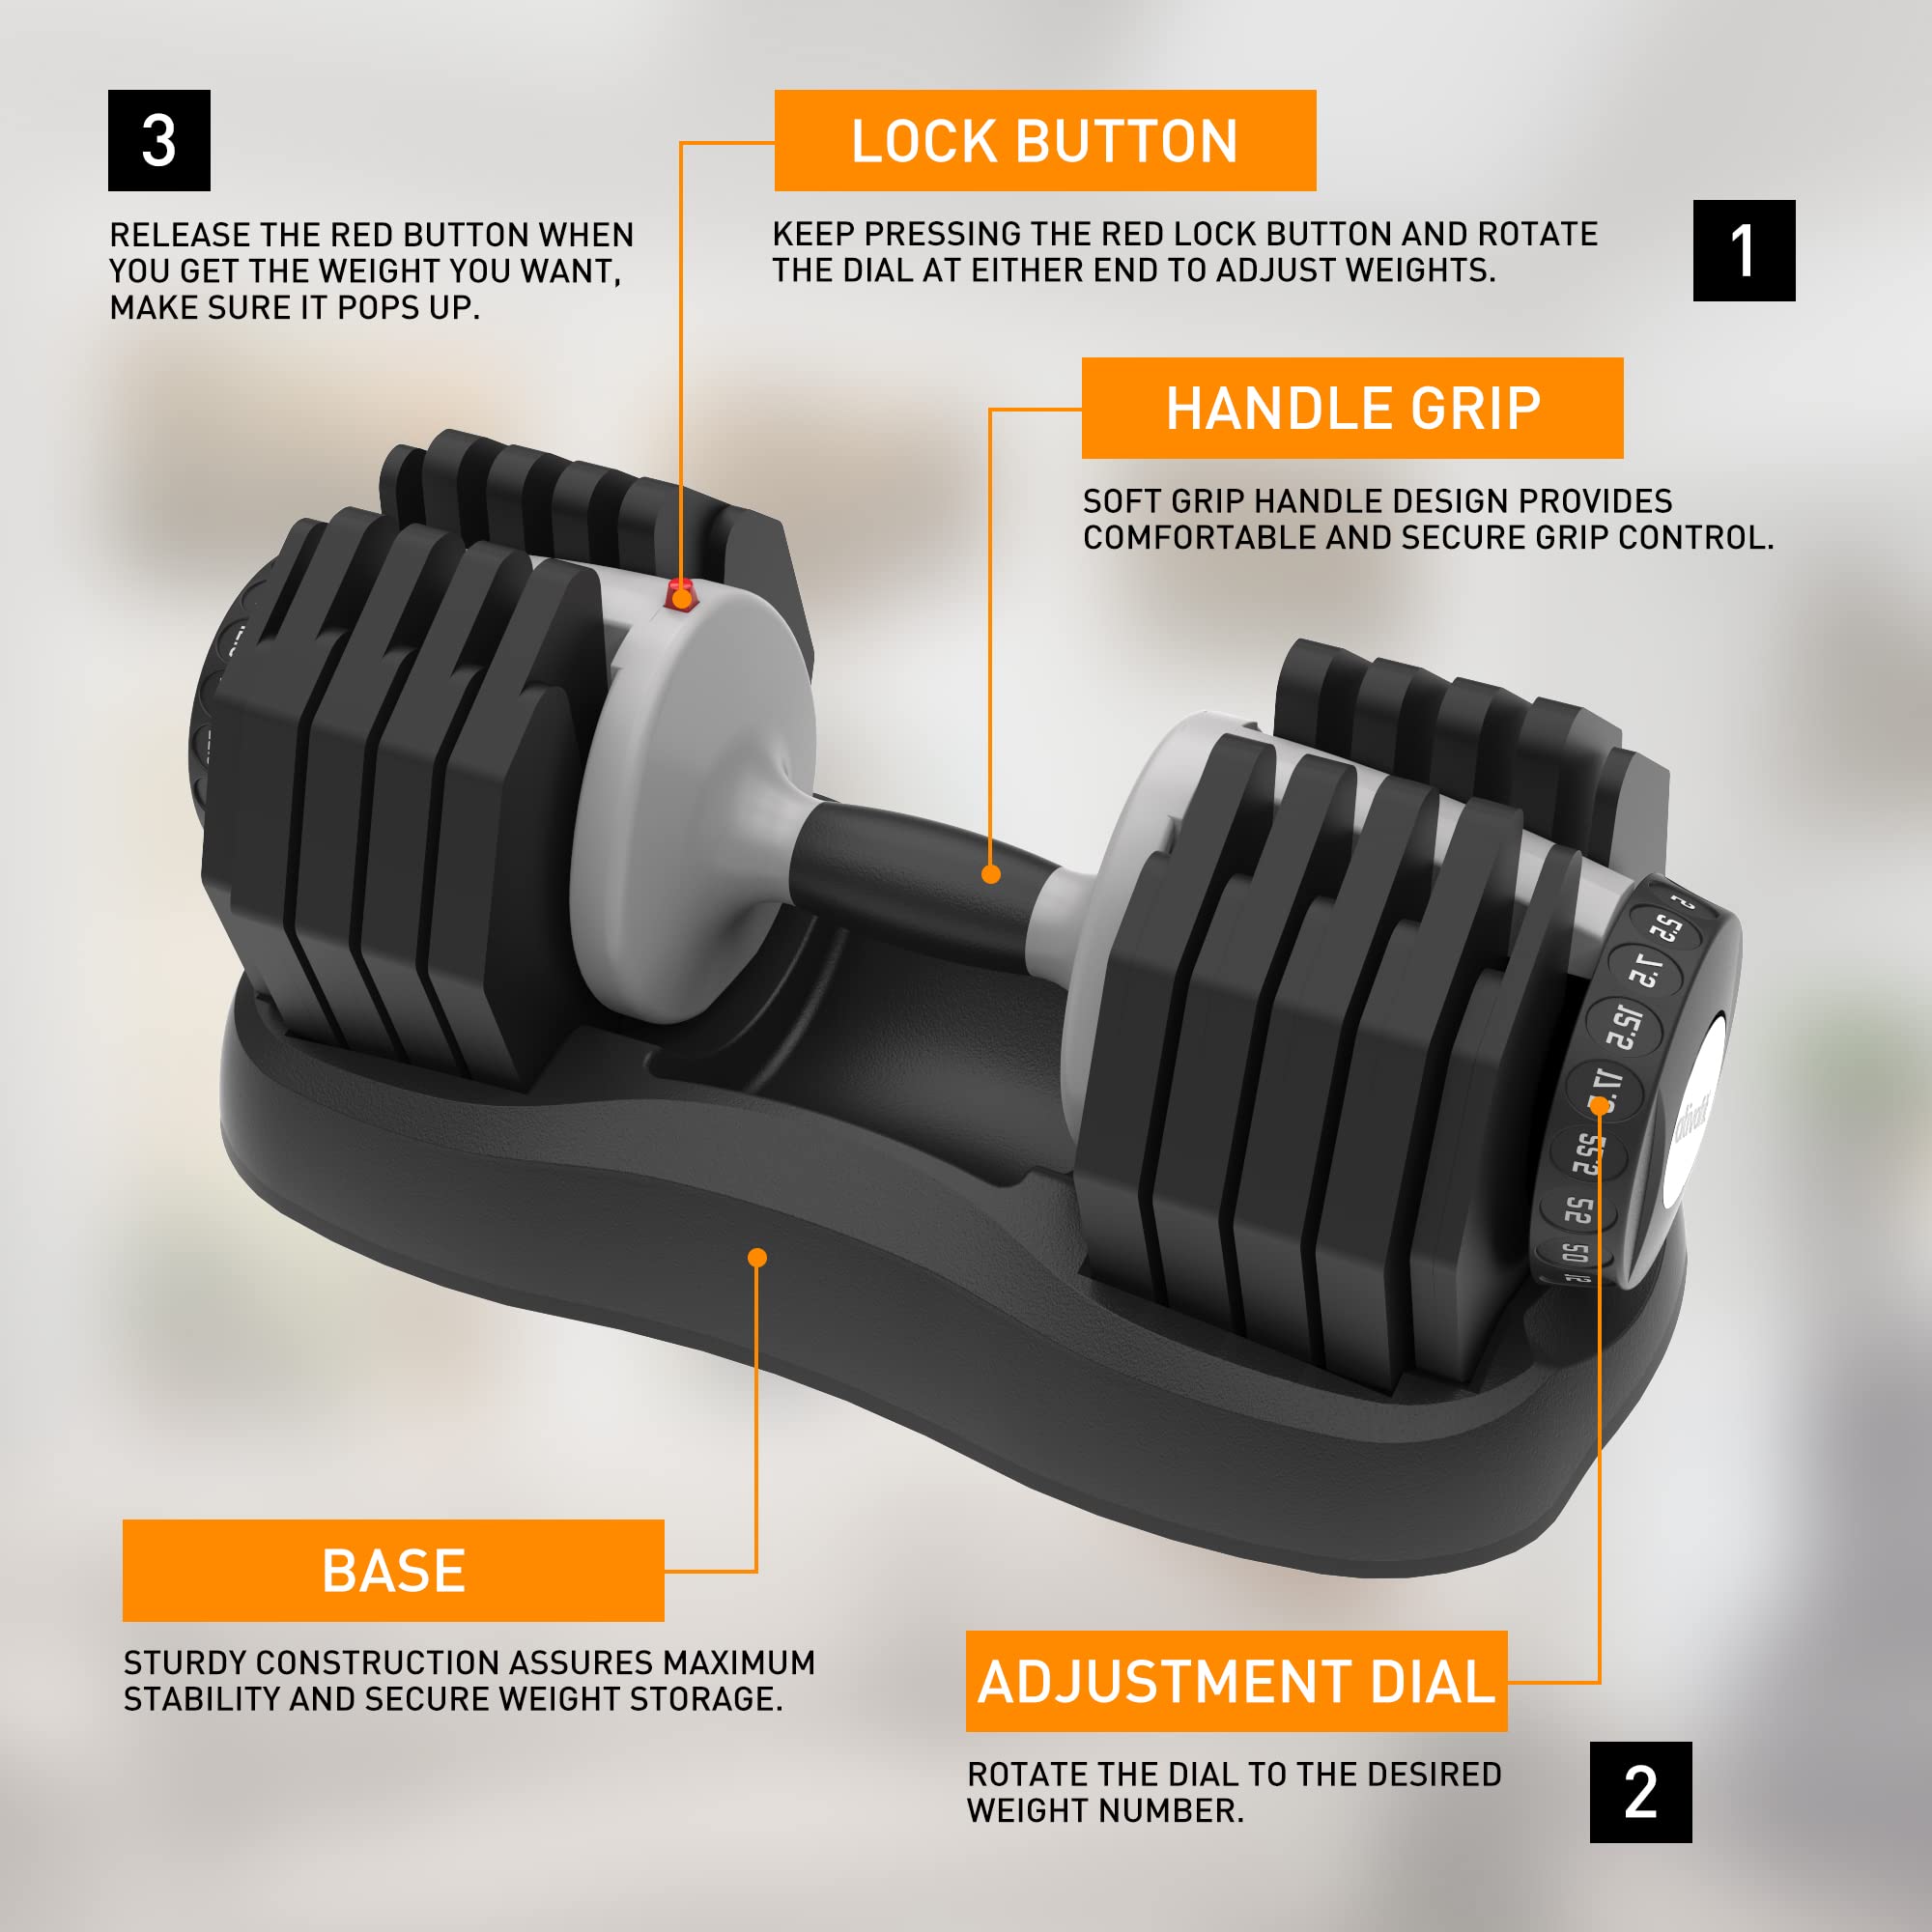 Adjustable Dumbbell Set Free Weights Dumbbell Multiweight Options 12.5/27.5/44/55/66 Lbs Suitable for Men Women Full Body Workout Fitness Home Gym